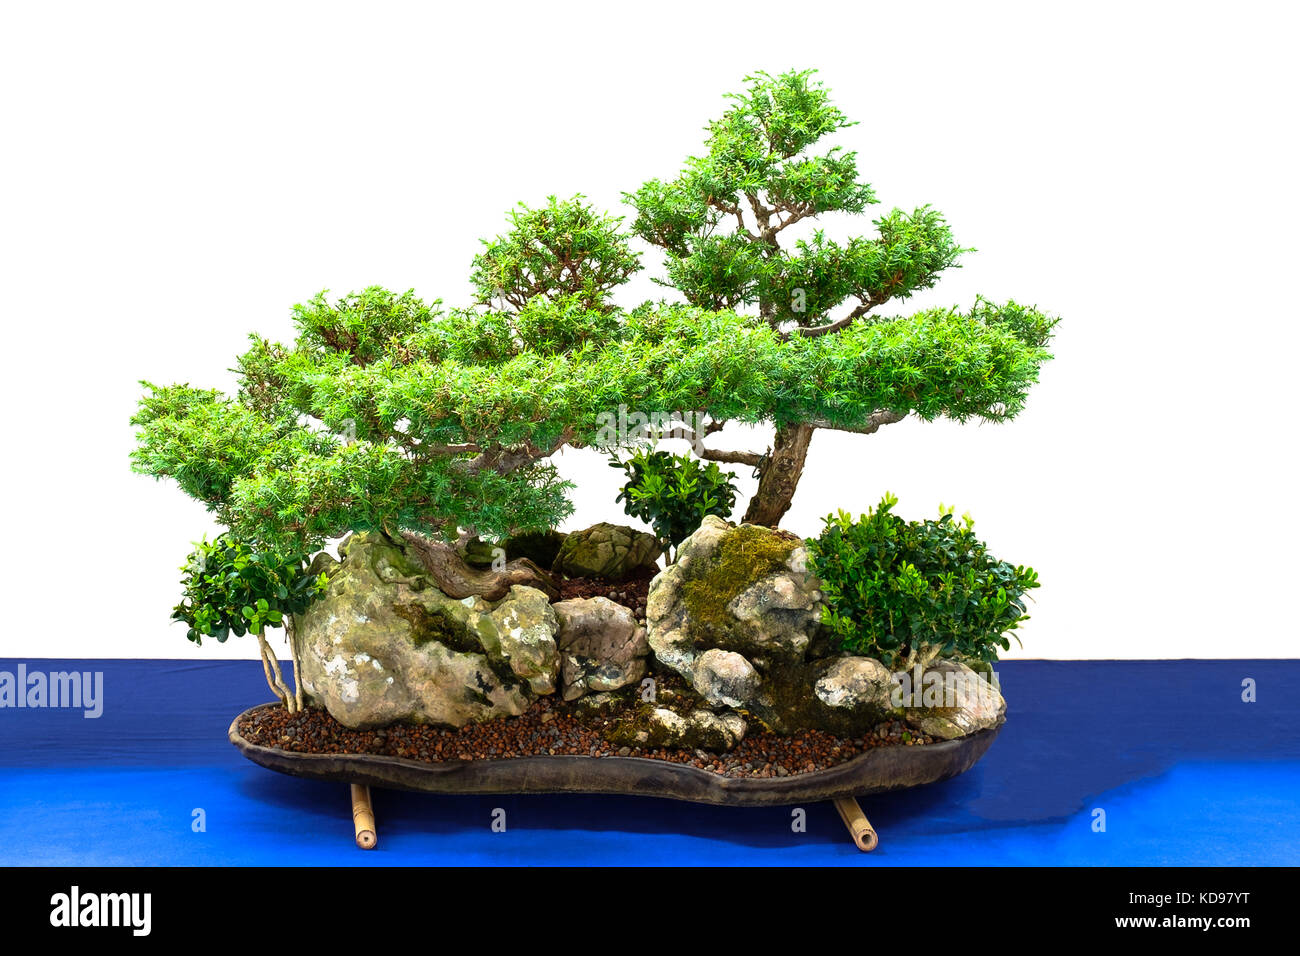 Bonsai landscape with cypress and boxwood trees over a rock Stock Photo